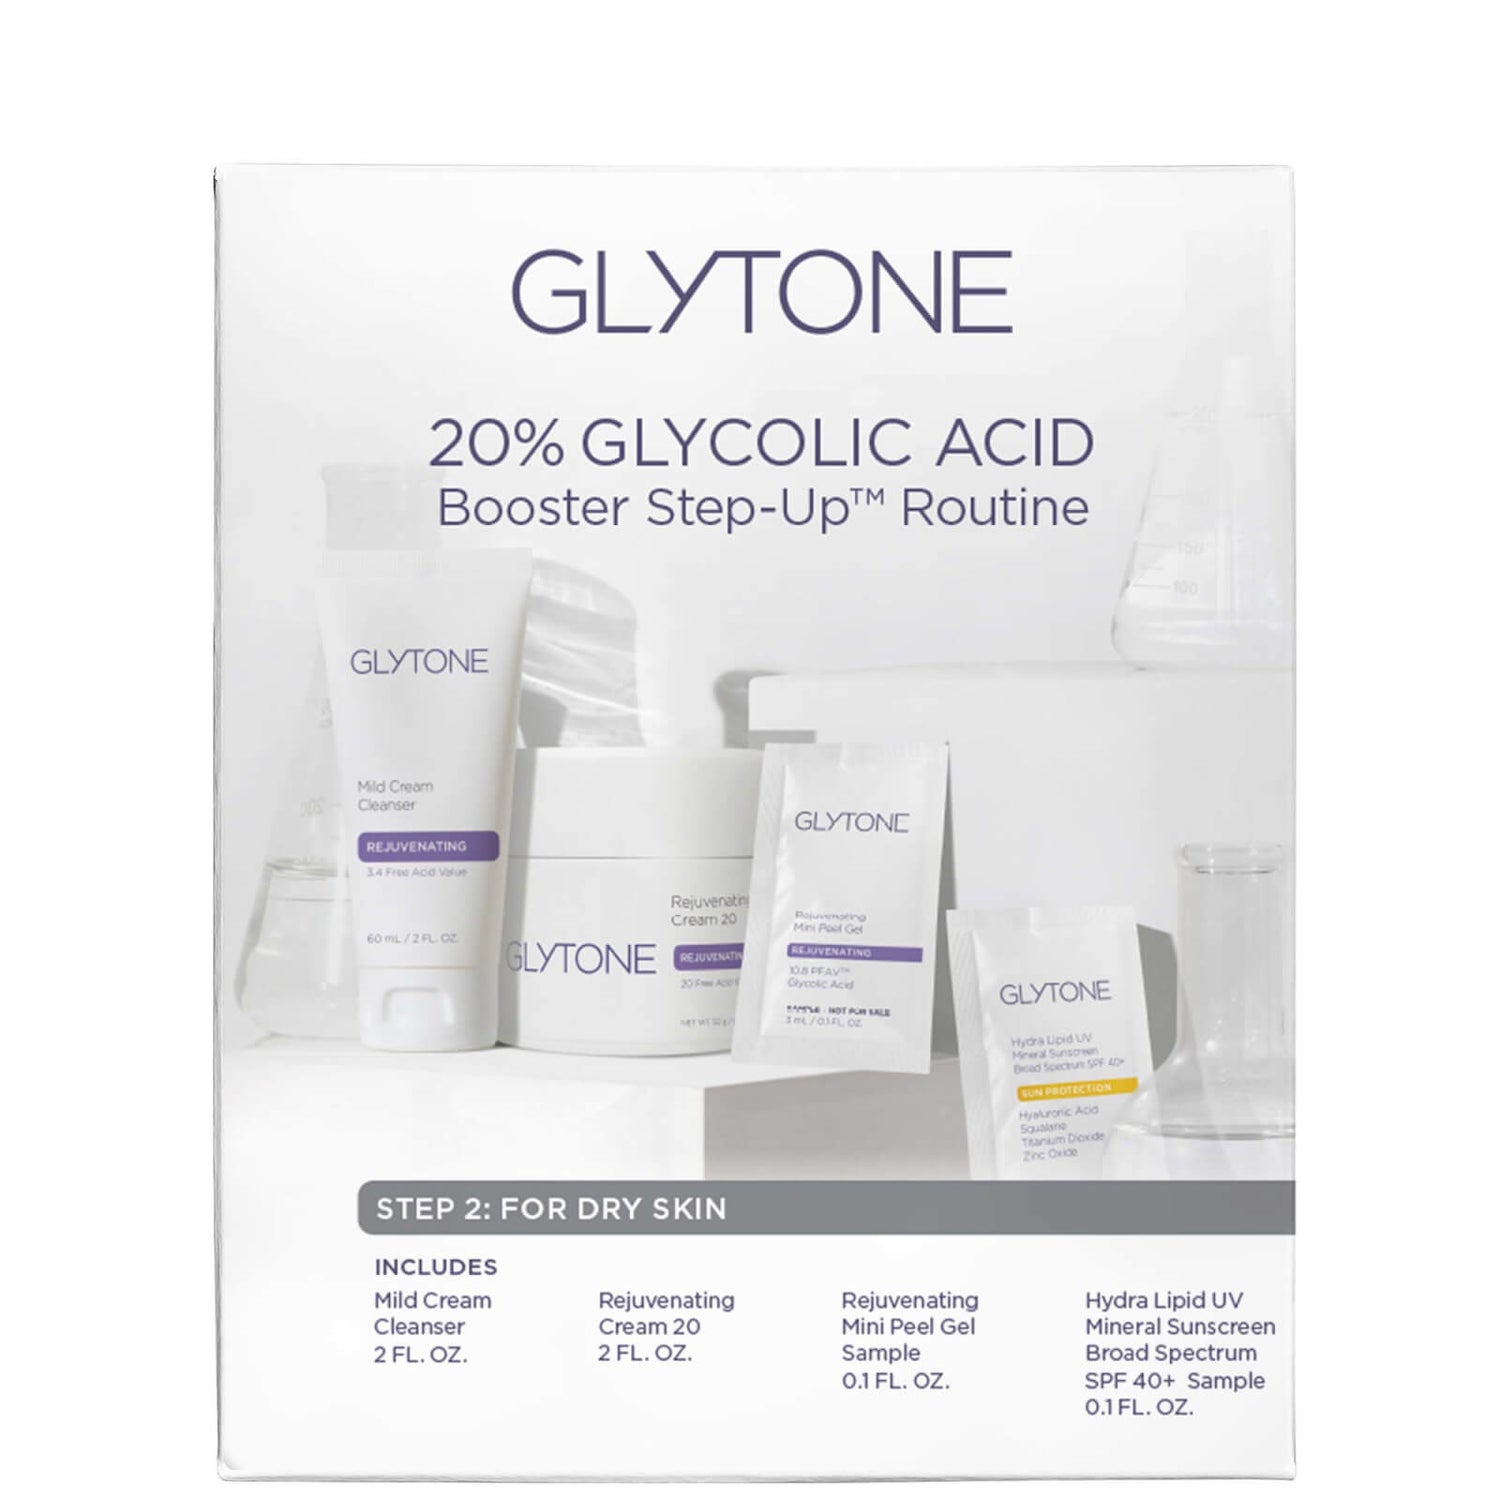 Glytone 20% Glycolic Acid Booster Step-Up Routine: Step 2 for Dry Skin